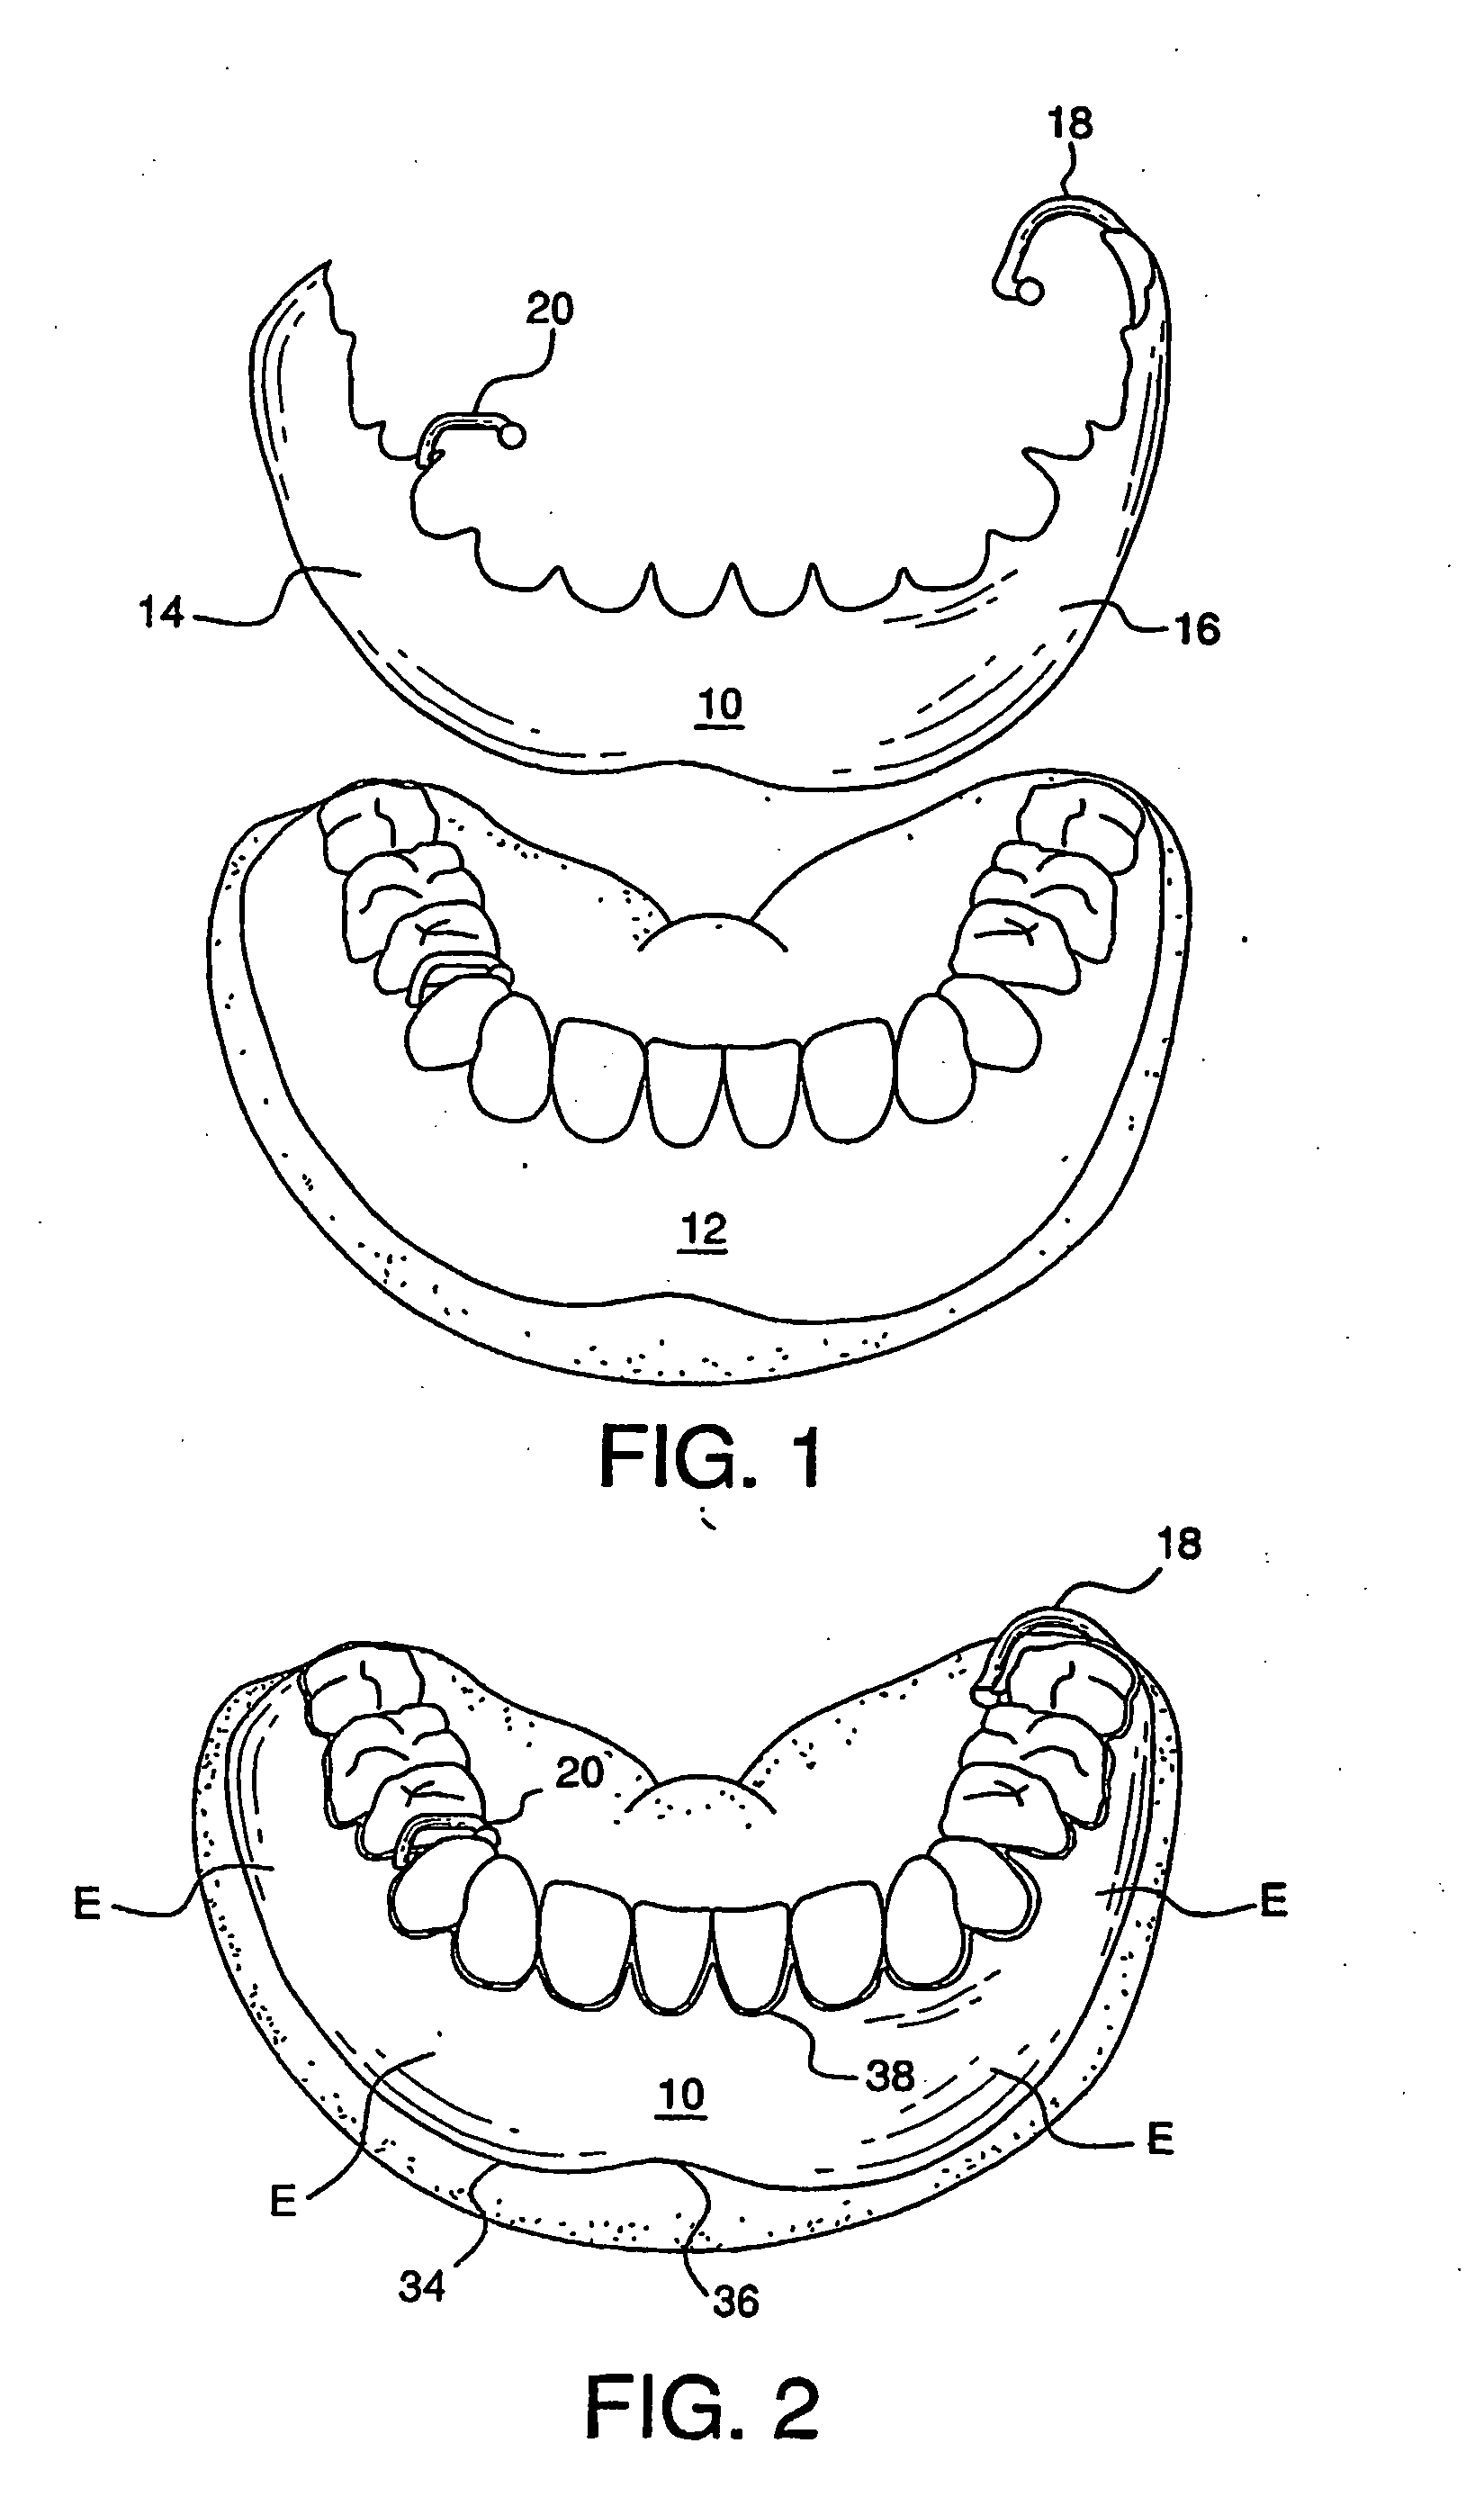 Cosmetic prosthesis and methods for making the same